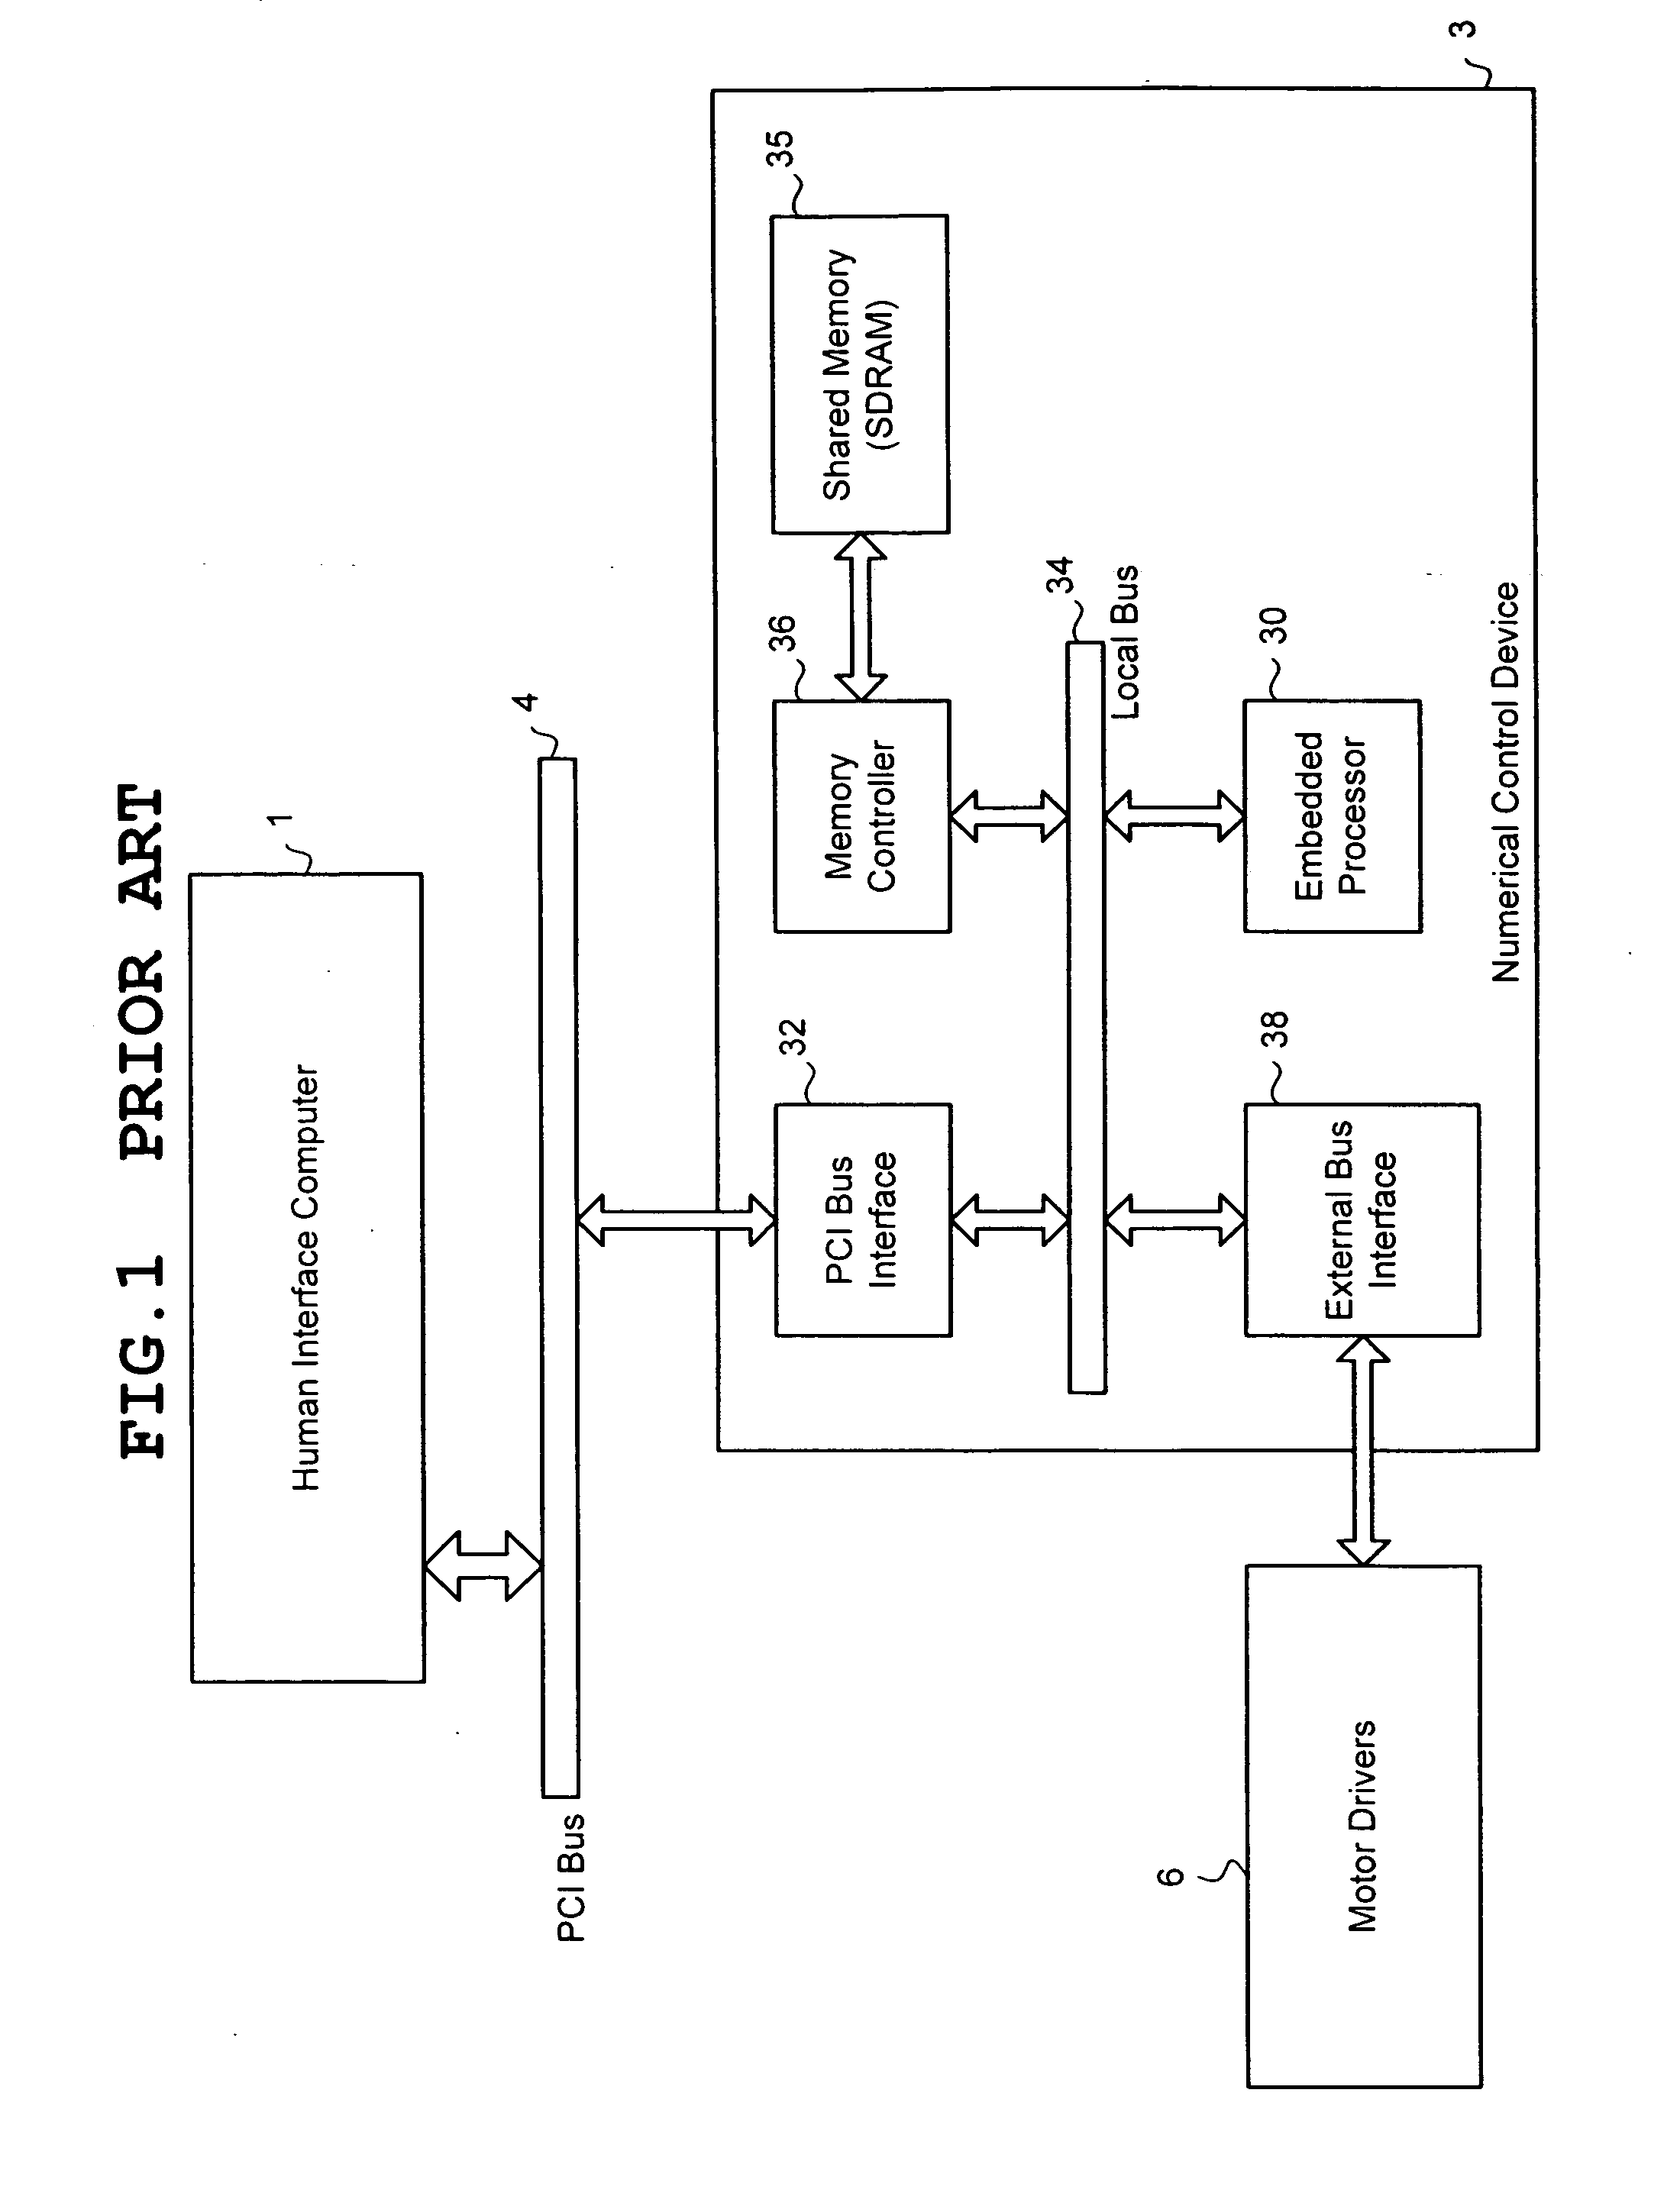 Computerized numerical control system with human interface using low cost shared memory